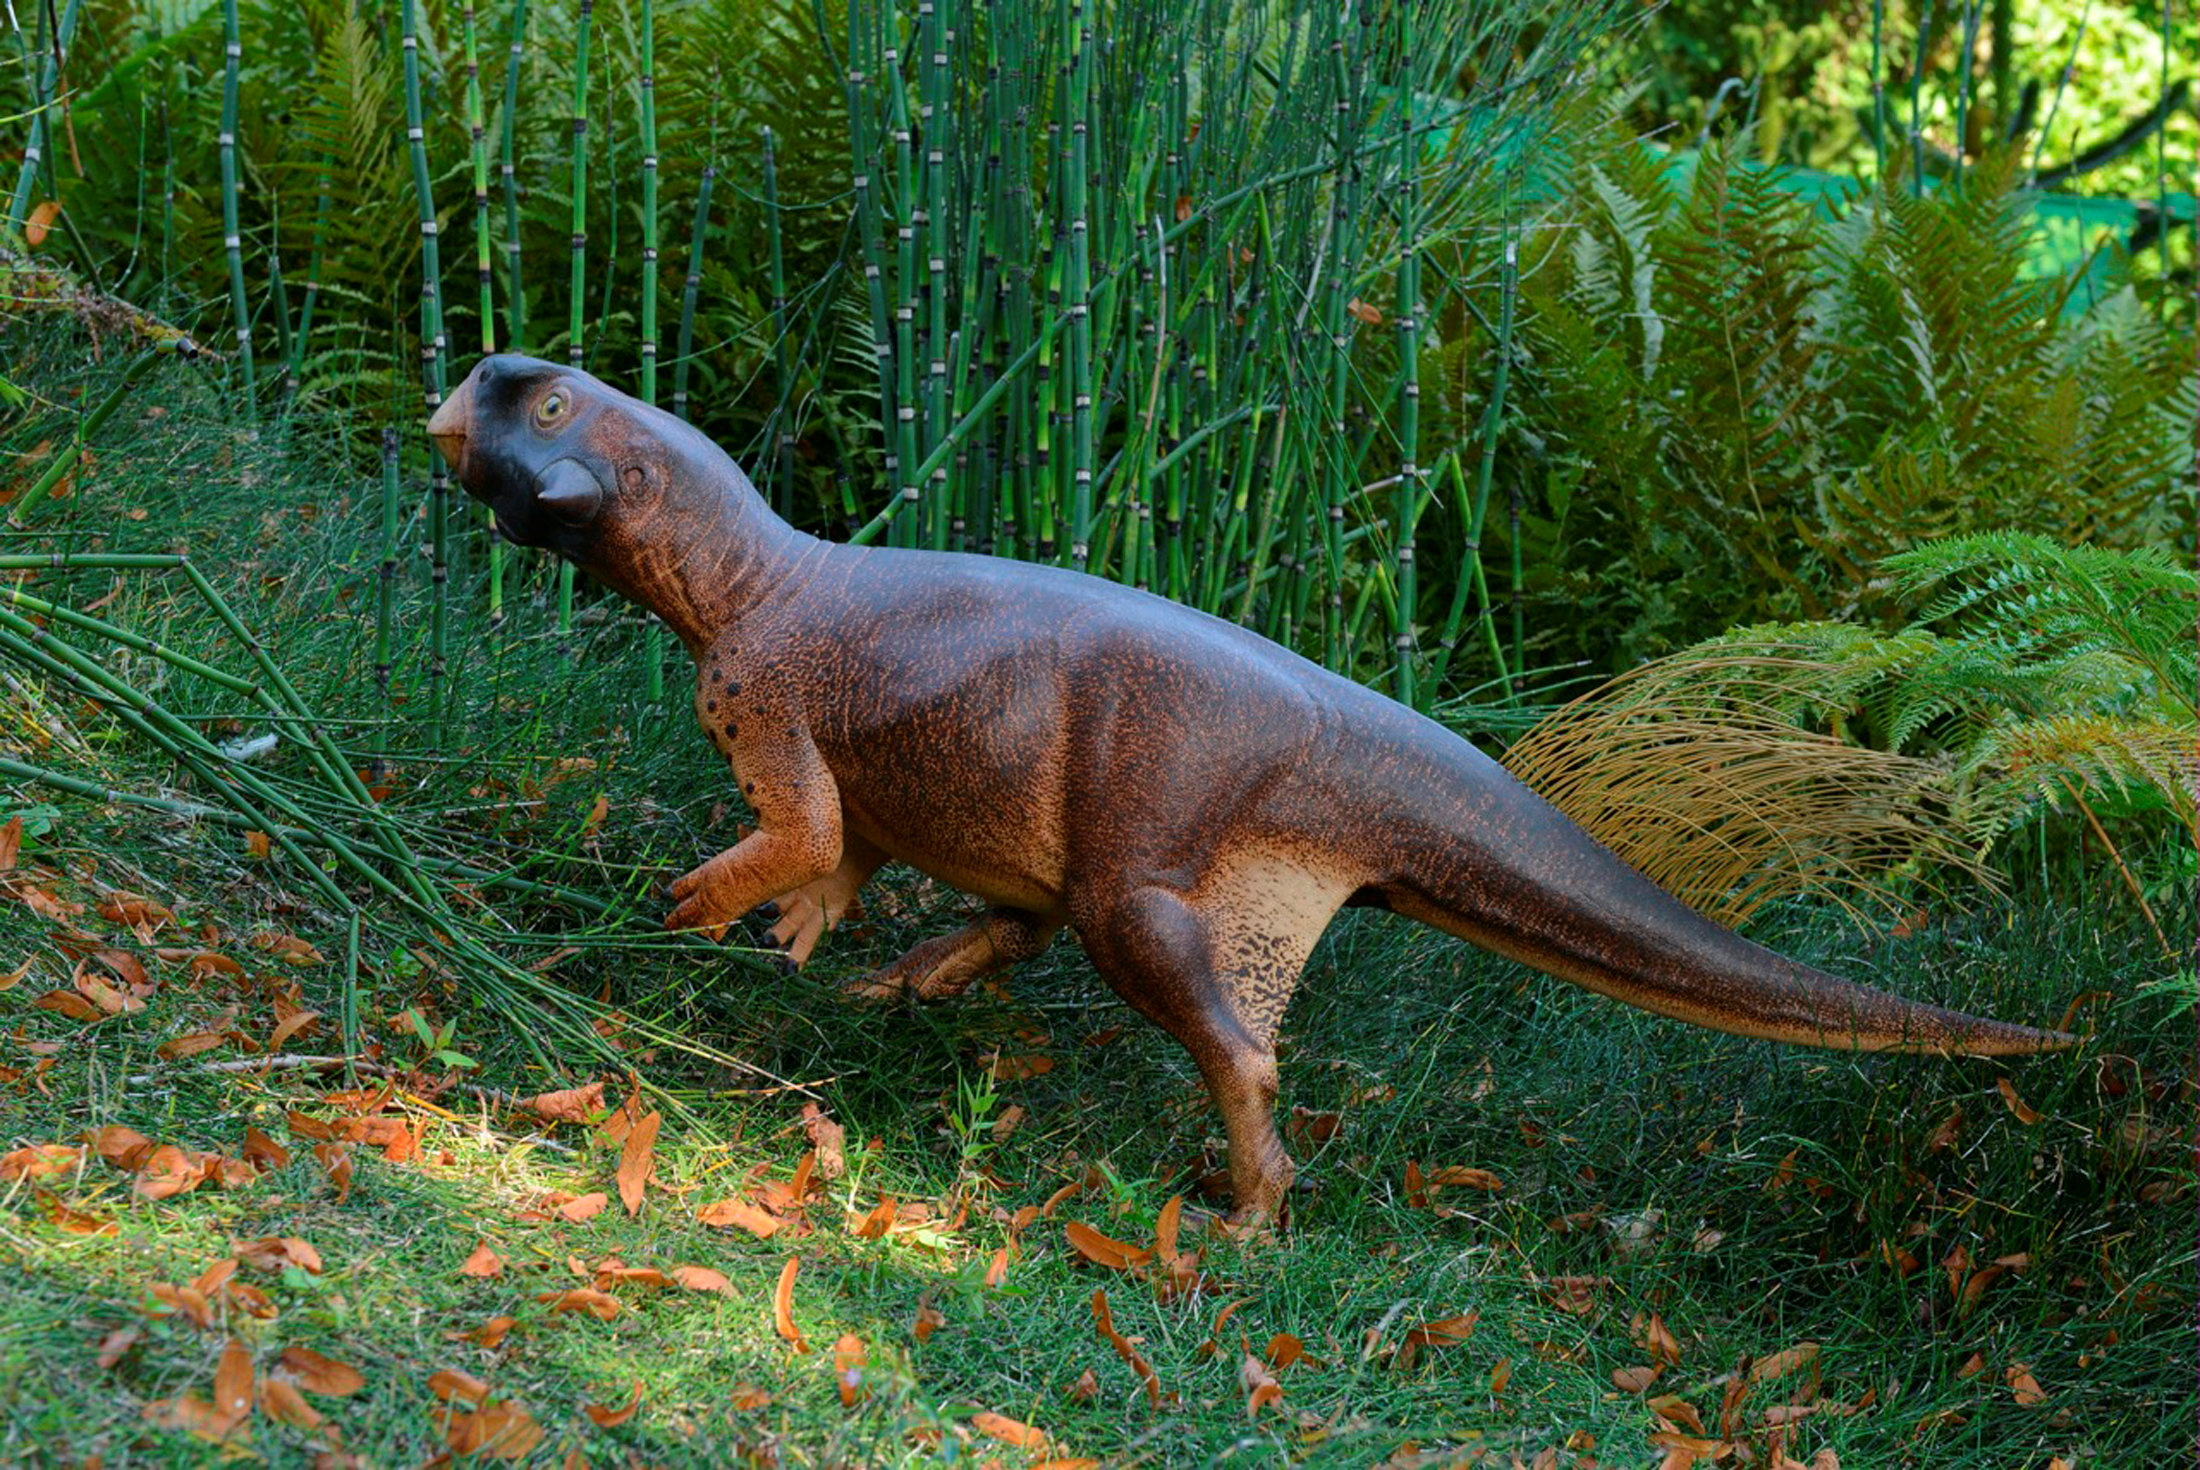 An artist's illustration of Psittacosaurus, a little dinosaur with a parrot-like beak and bristles on its tail that roamed thick forests in China about 120 million years ago is shown in this image released on September 15, 2016. Courtesy Jakob Vinther/University of Bristol and Bob Nicholls/Handout via REUTERS  ATTENTION EDITORS - THIS IMAGE WAS PROVIDED BY A THIRD PARTY. EDITORIAL USE ONLY. NO RESALES. NO ARCHIVE.